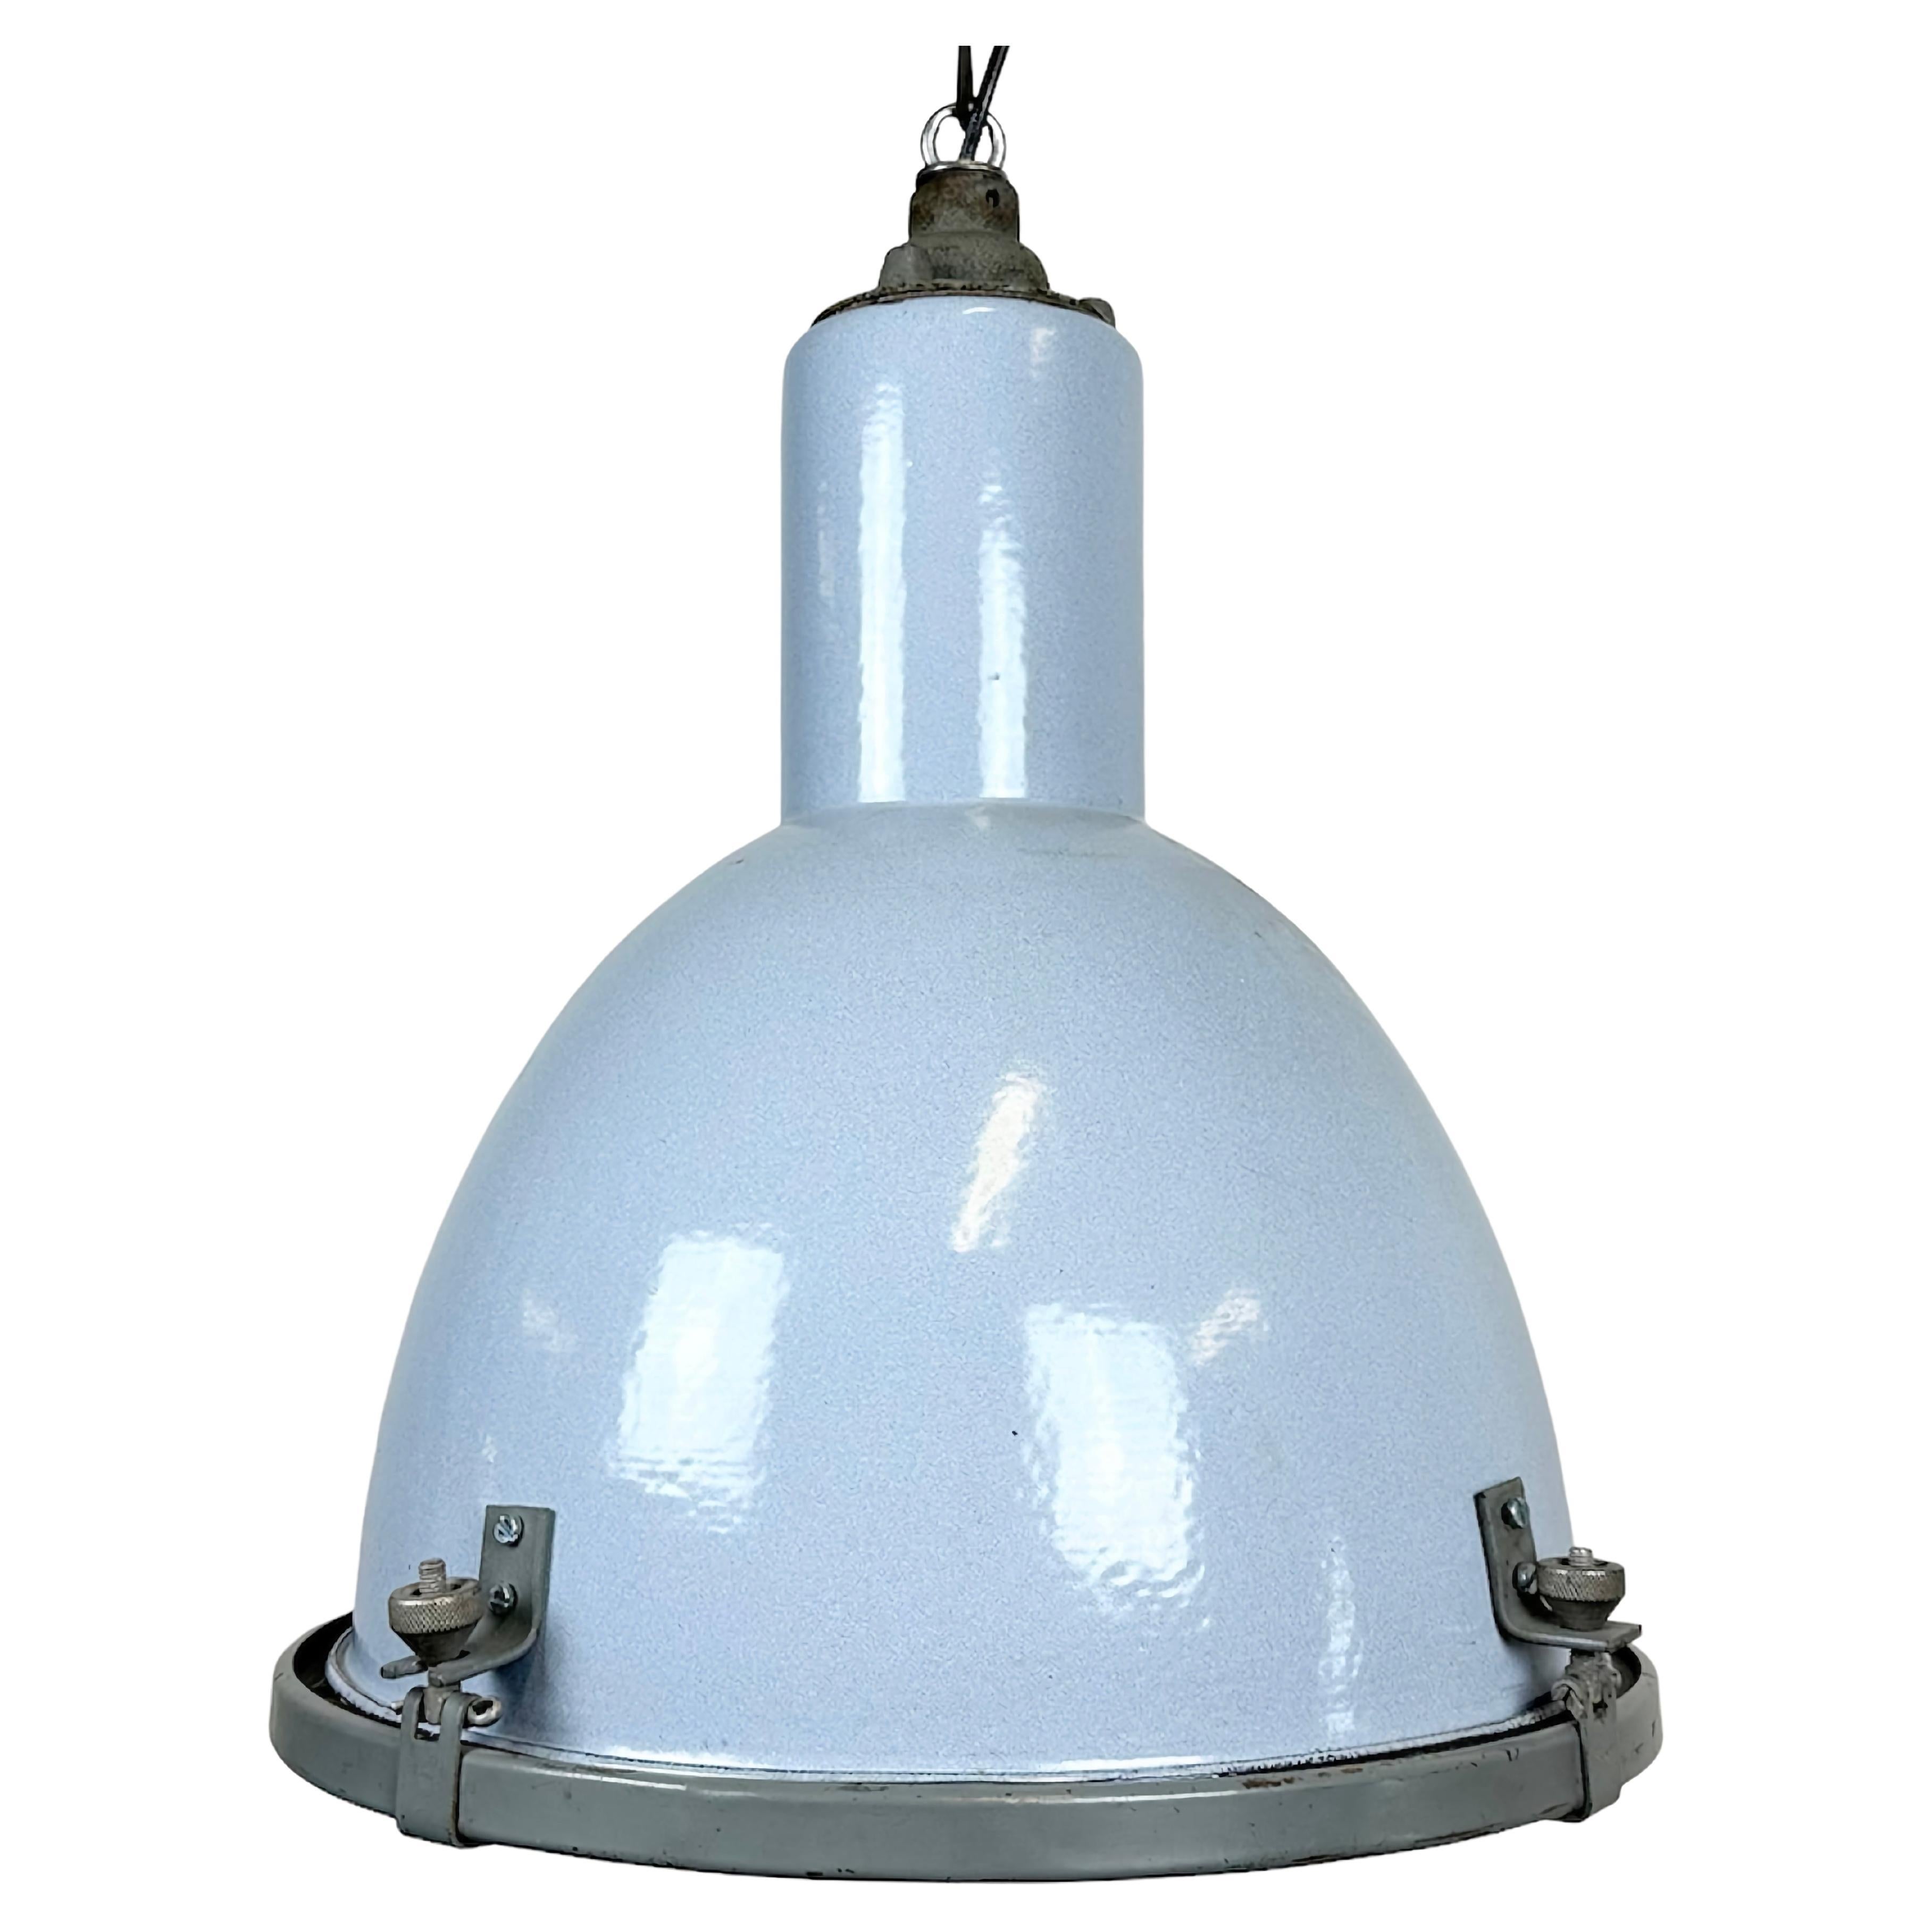 Bauhaus Grey Enamel Industrial Pendant Lamp with Glass Cover, 1950s For Sale